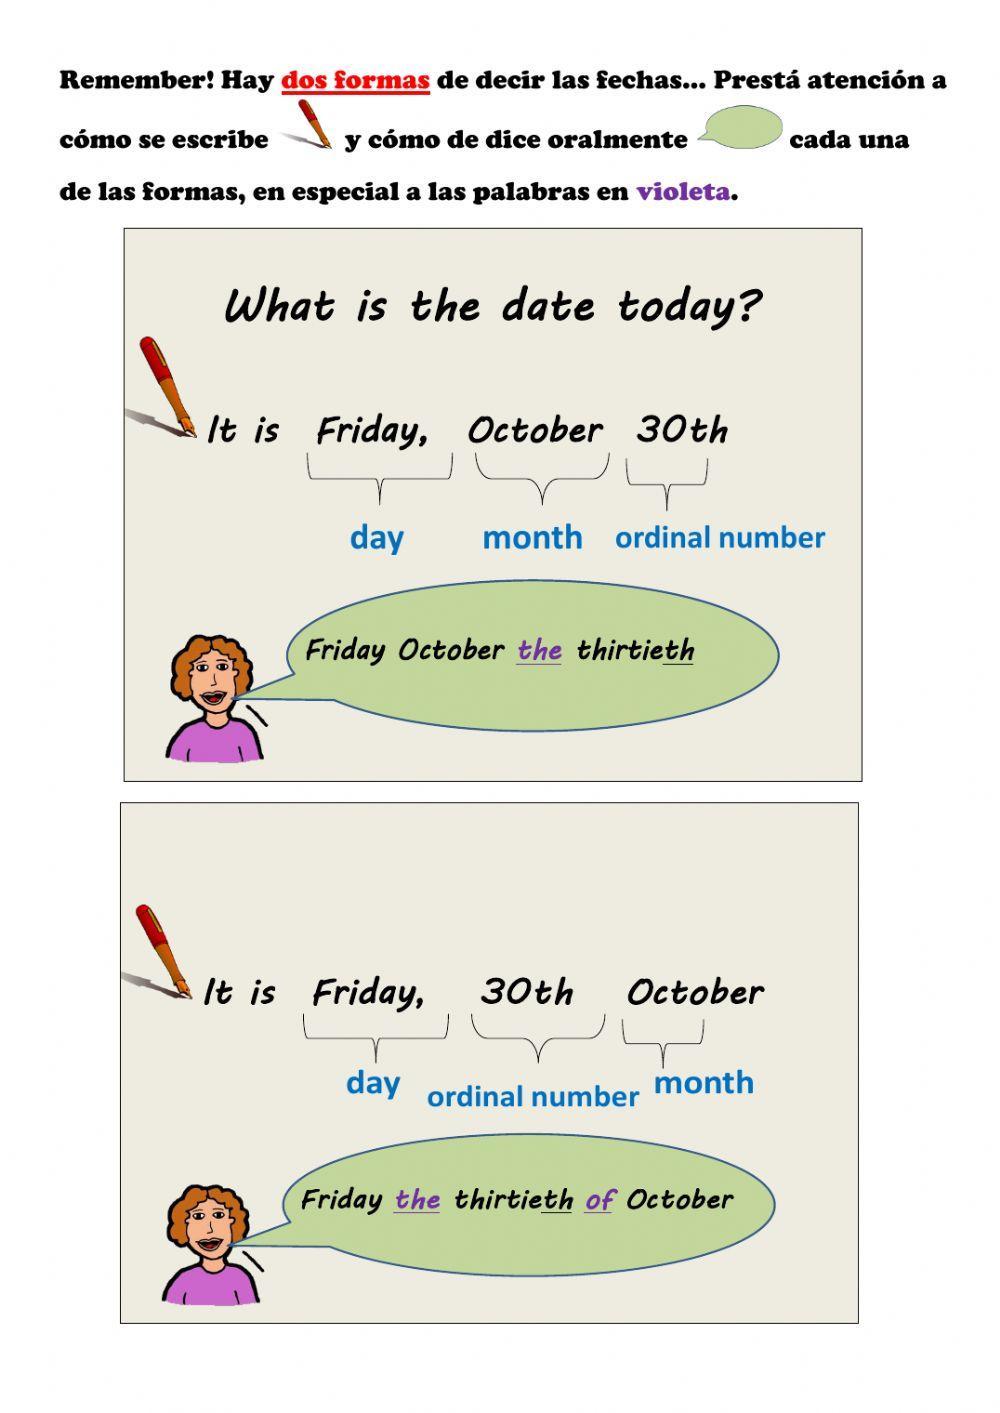 Dates and ordinal numbers